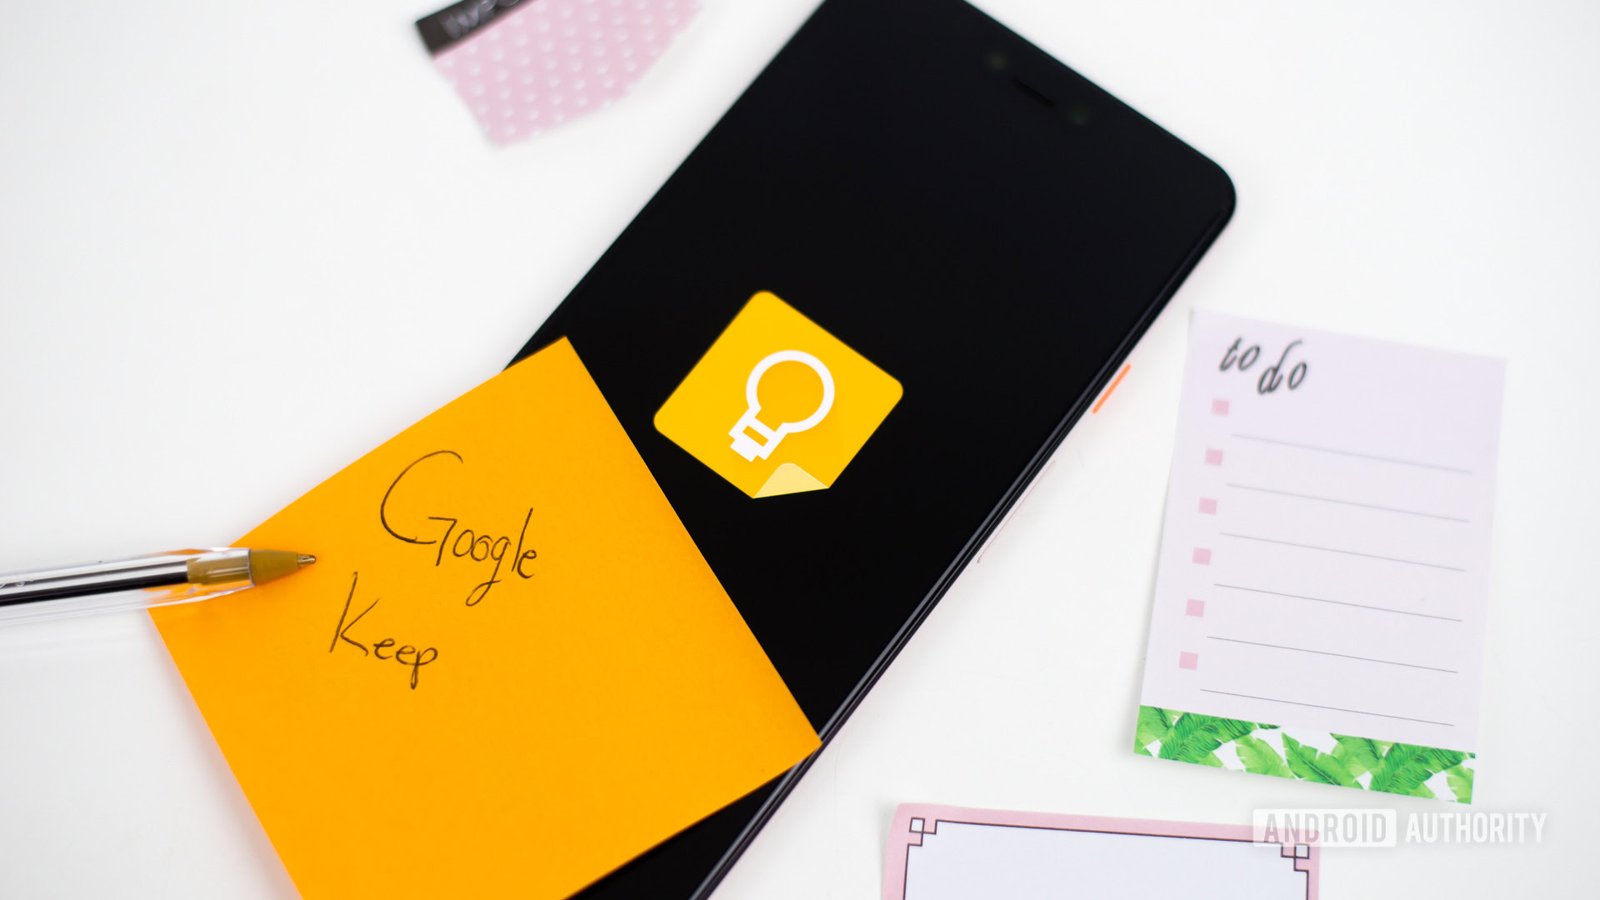 You can now use two Google Keep accounts on your Android tablet